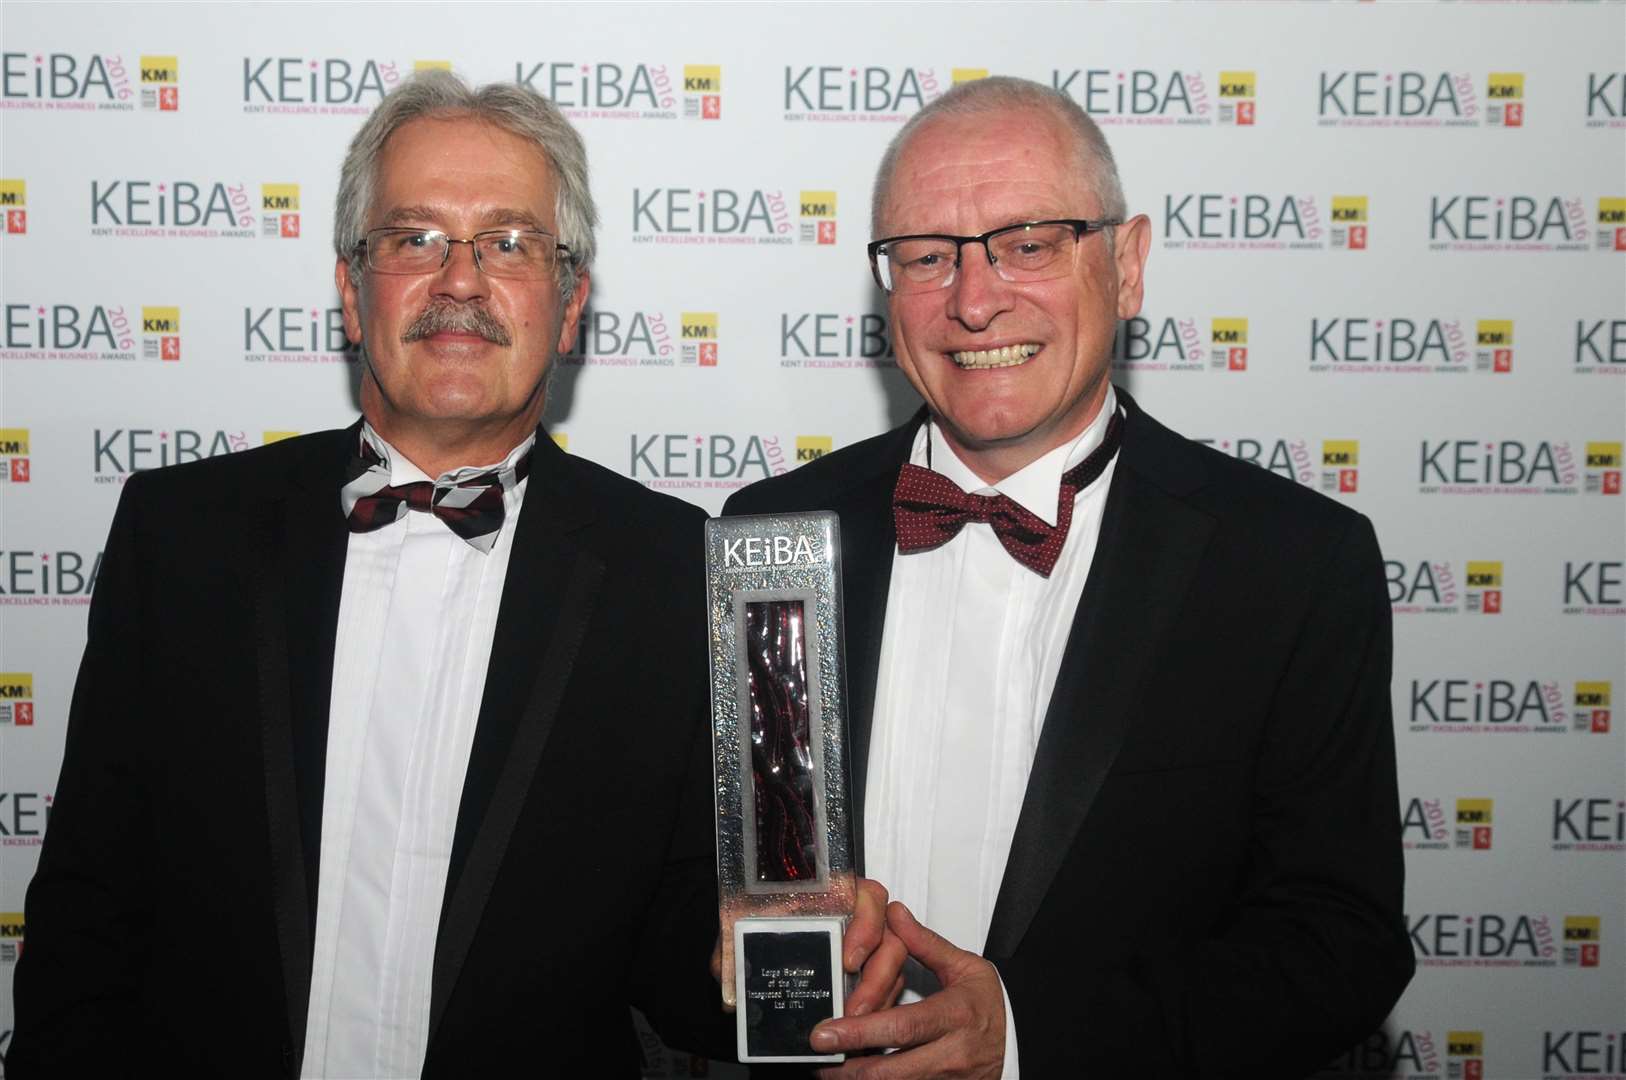 Greg Smith and Tom Cole with the Large Business of the Year trophy won by their firm ITL